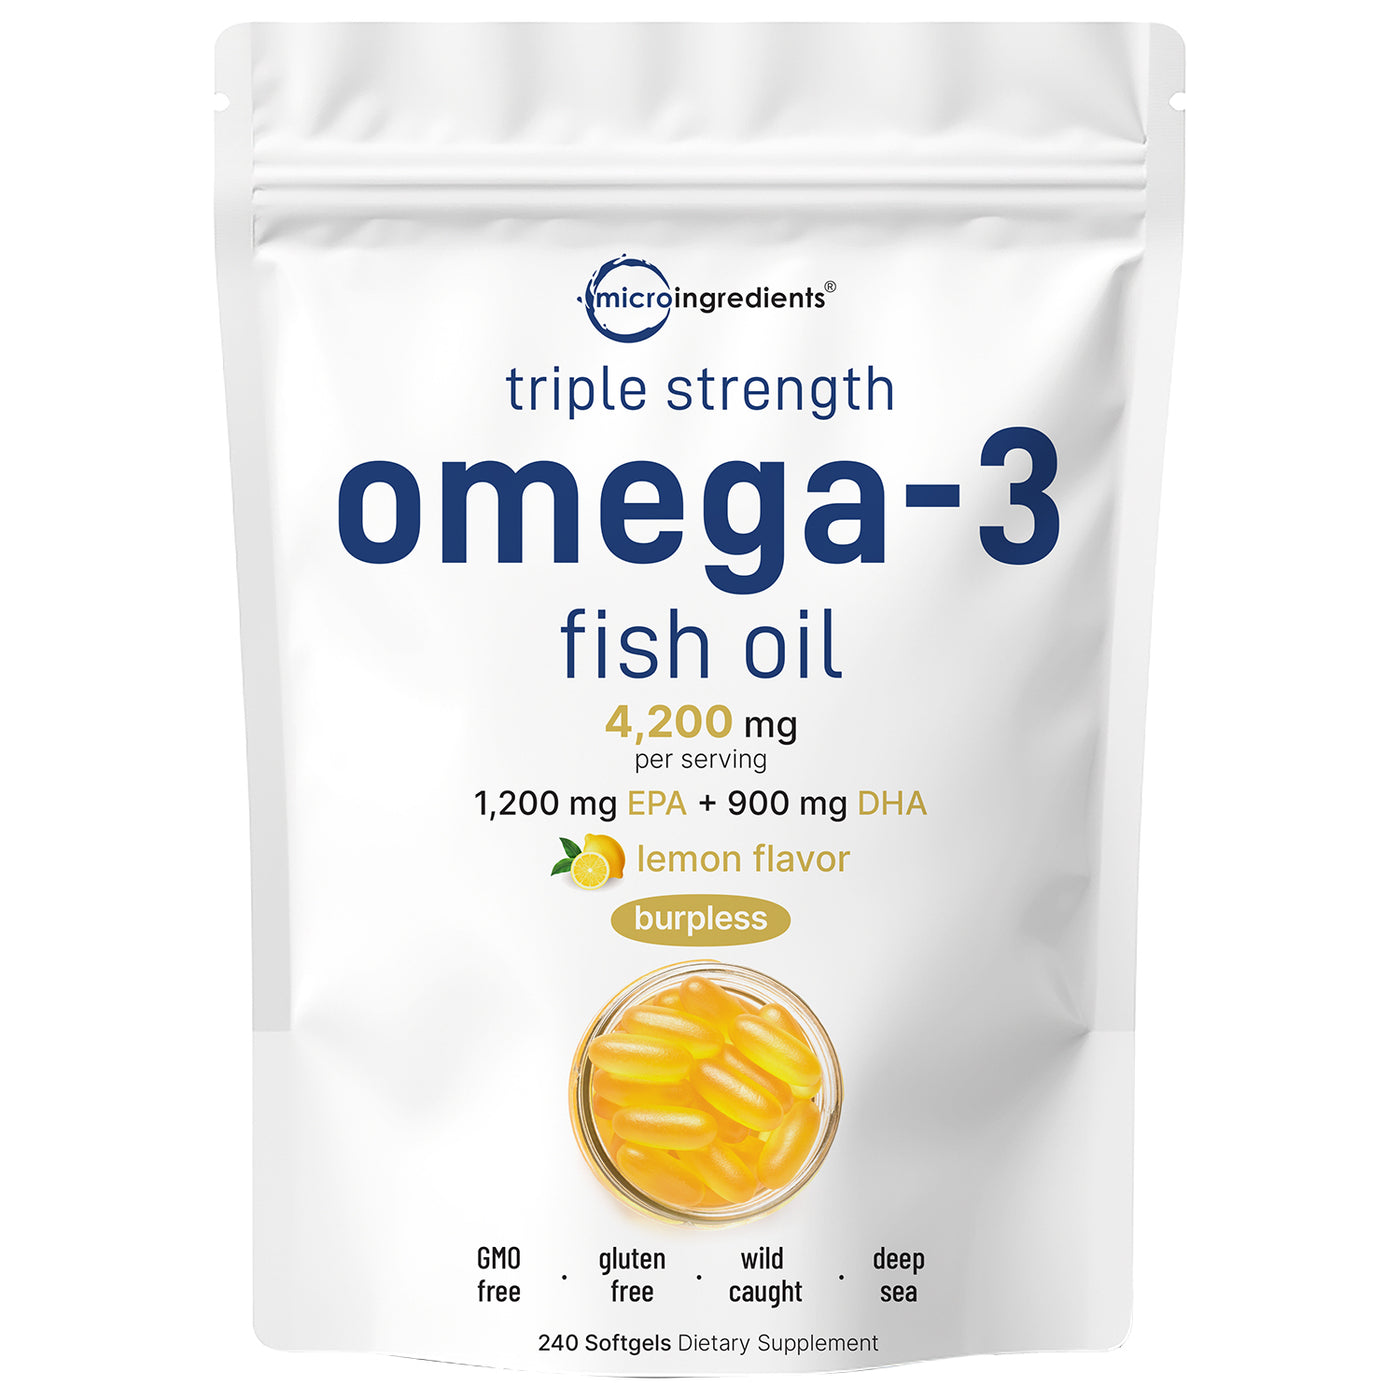 Triple Strength Omega 3 Fish Oil Supplements 4200mg Per Serving, 240 Counts